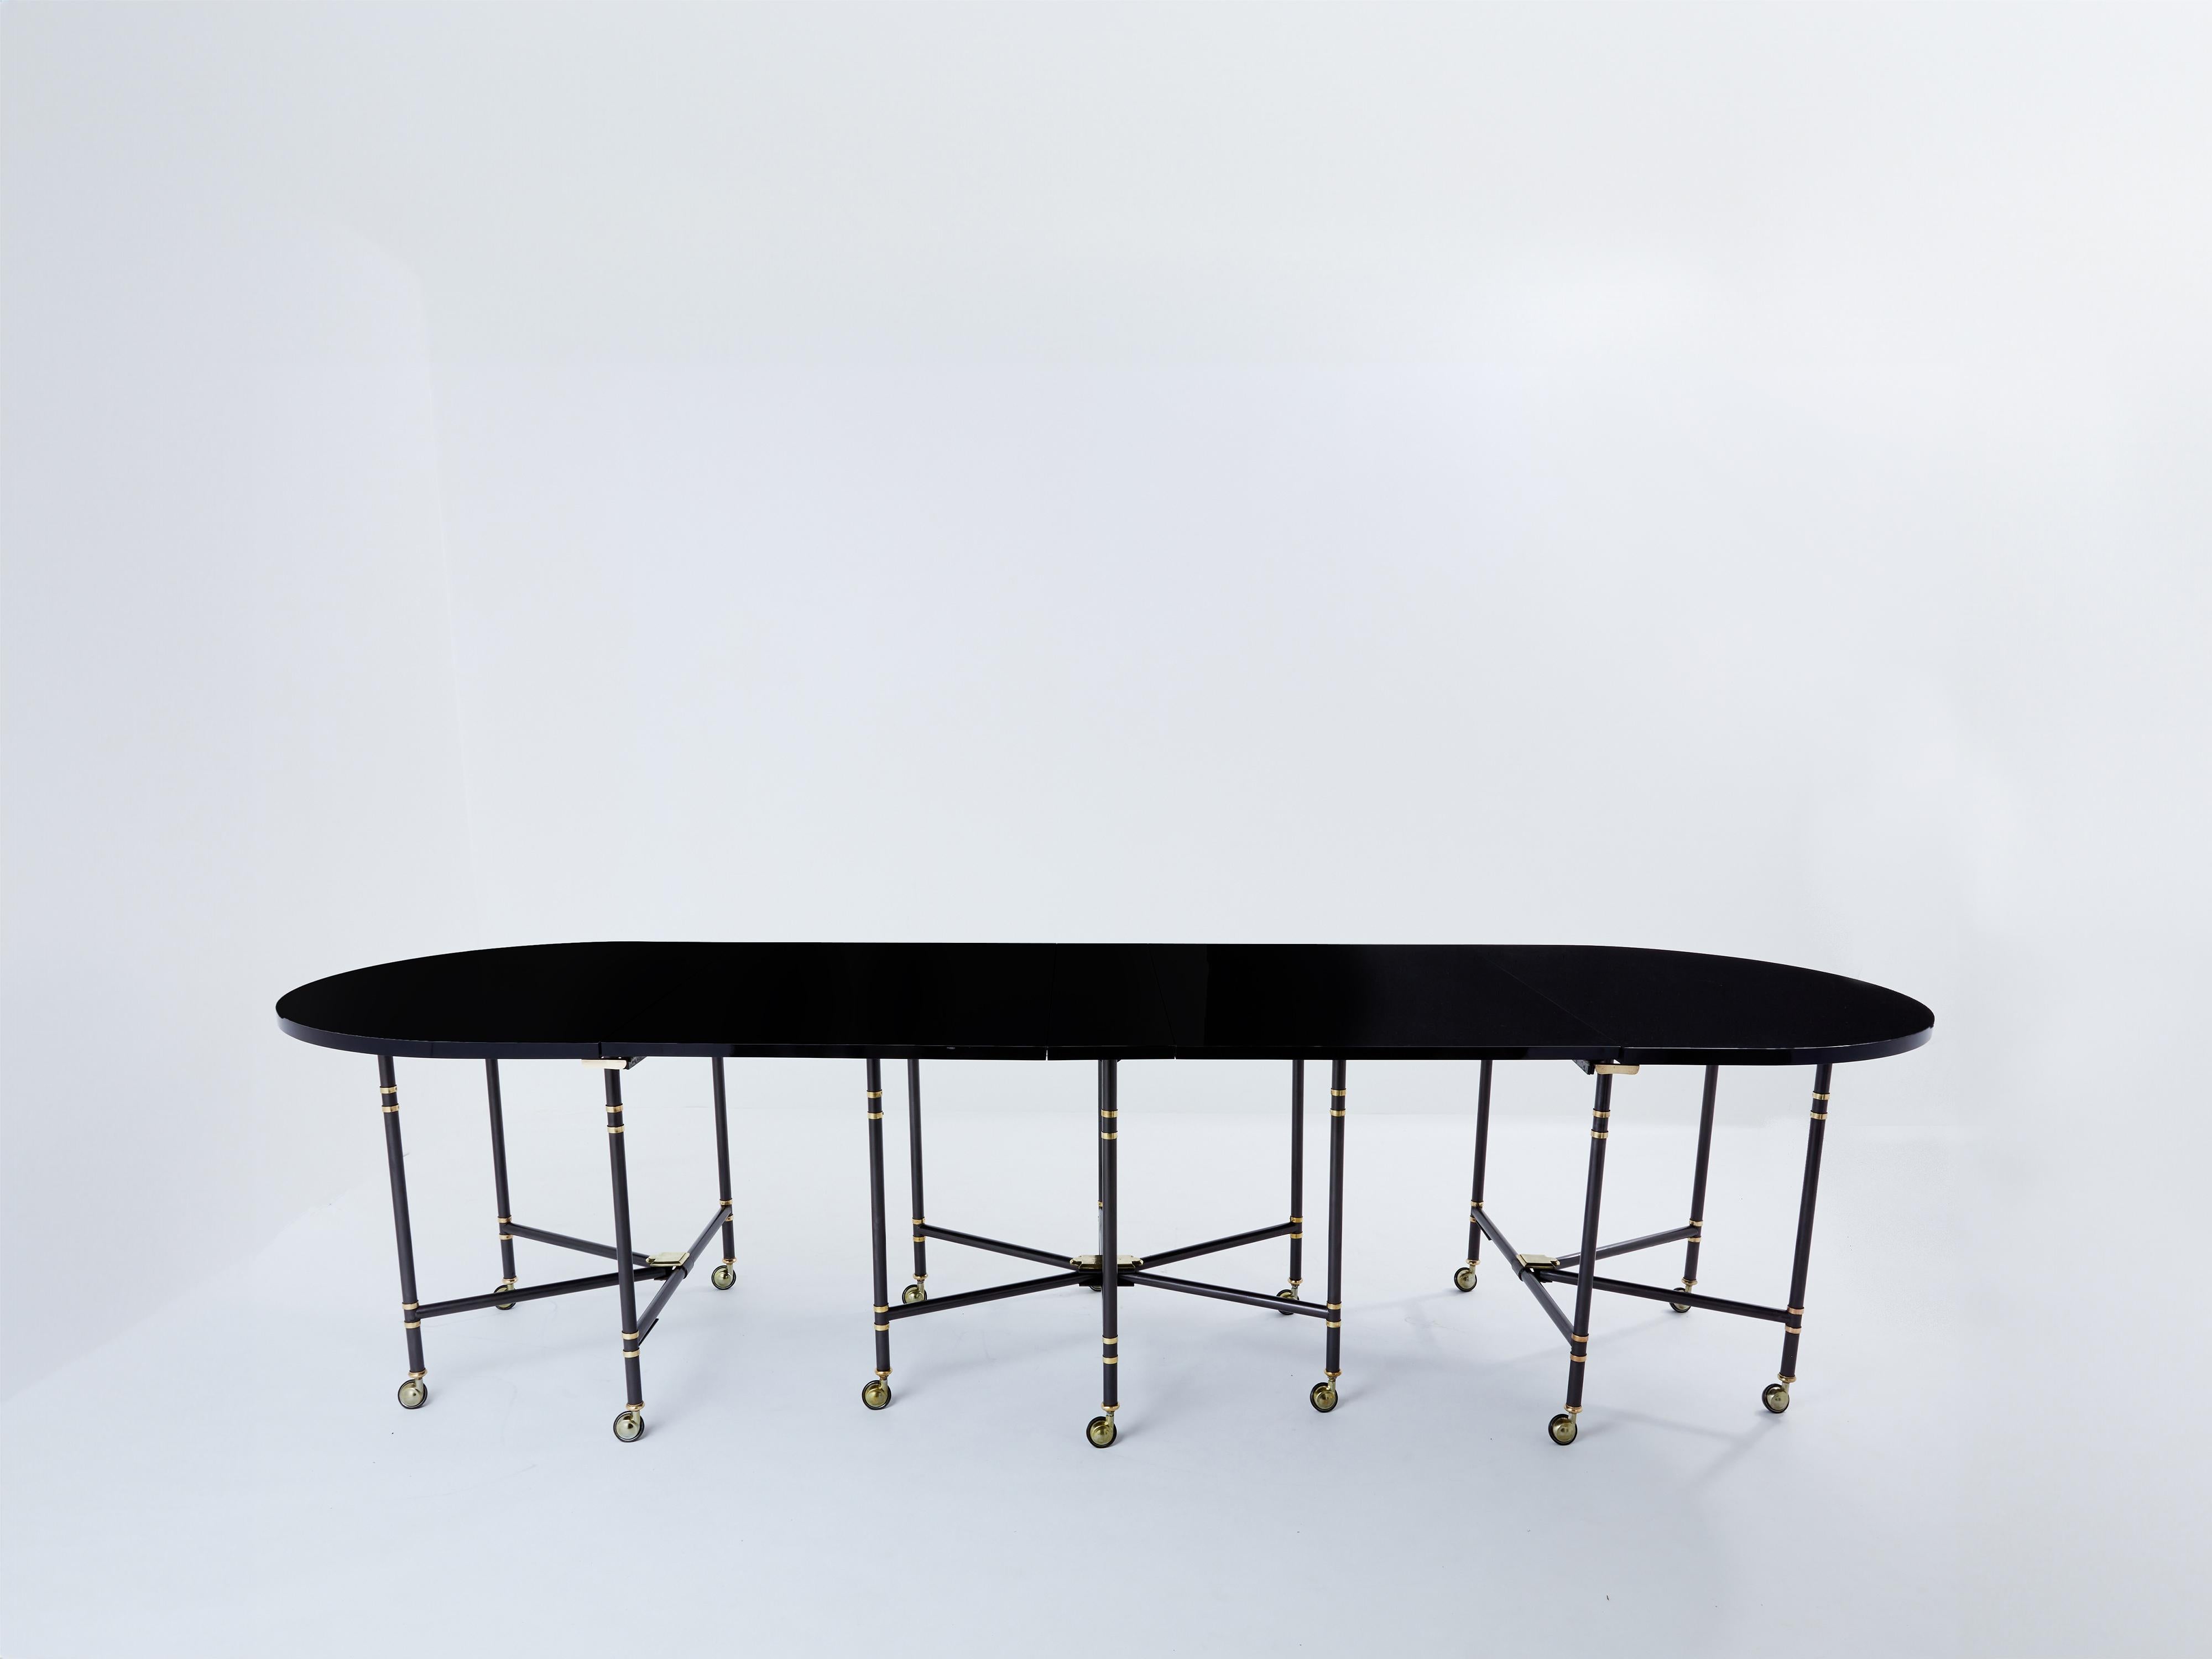 This long oval black lacquered top extension dining table is one of Maison Jansen's most iconic pieces. Named Royal, this table was a special design by Pierre Delbée for French actress Jacqueline Delubac in the early 1960s, who hated the idea of a